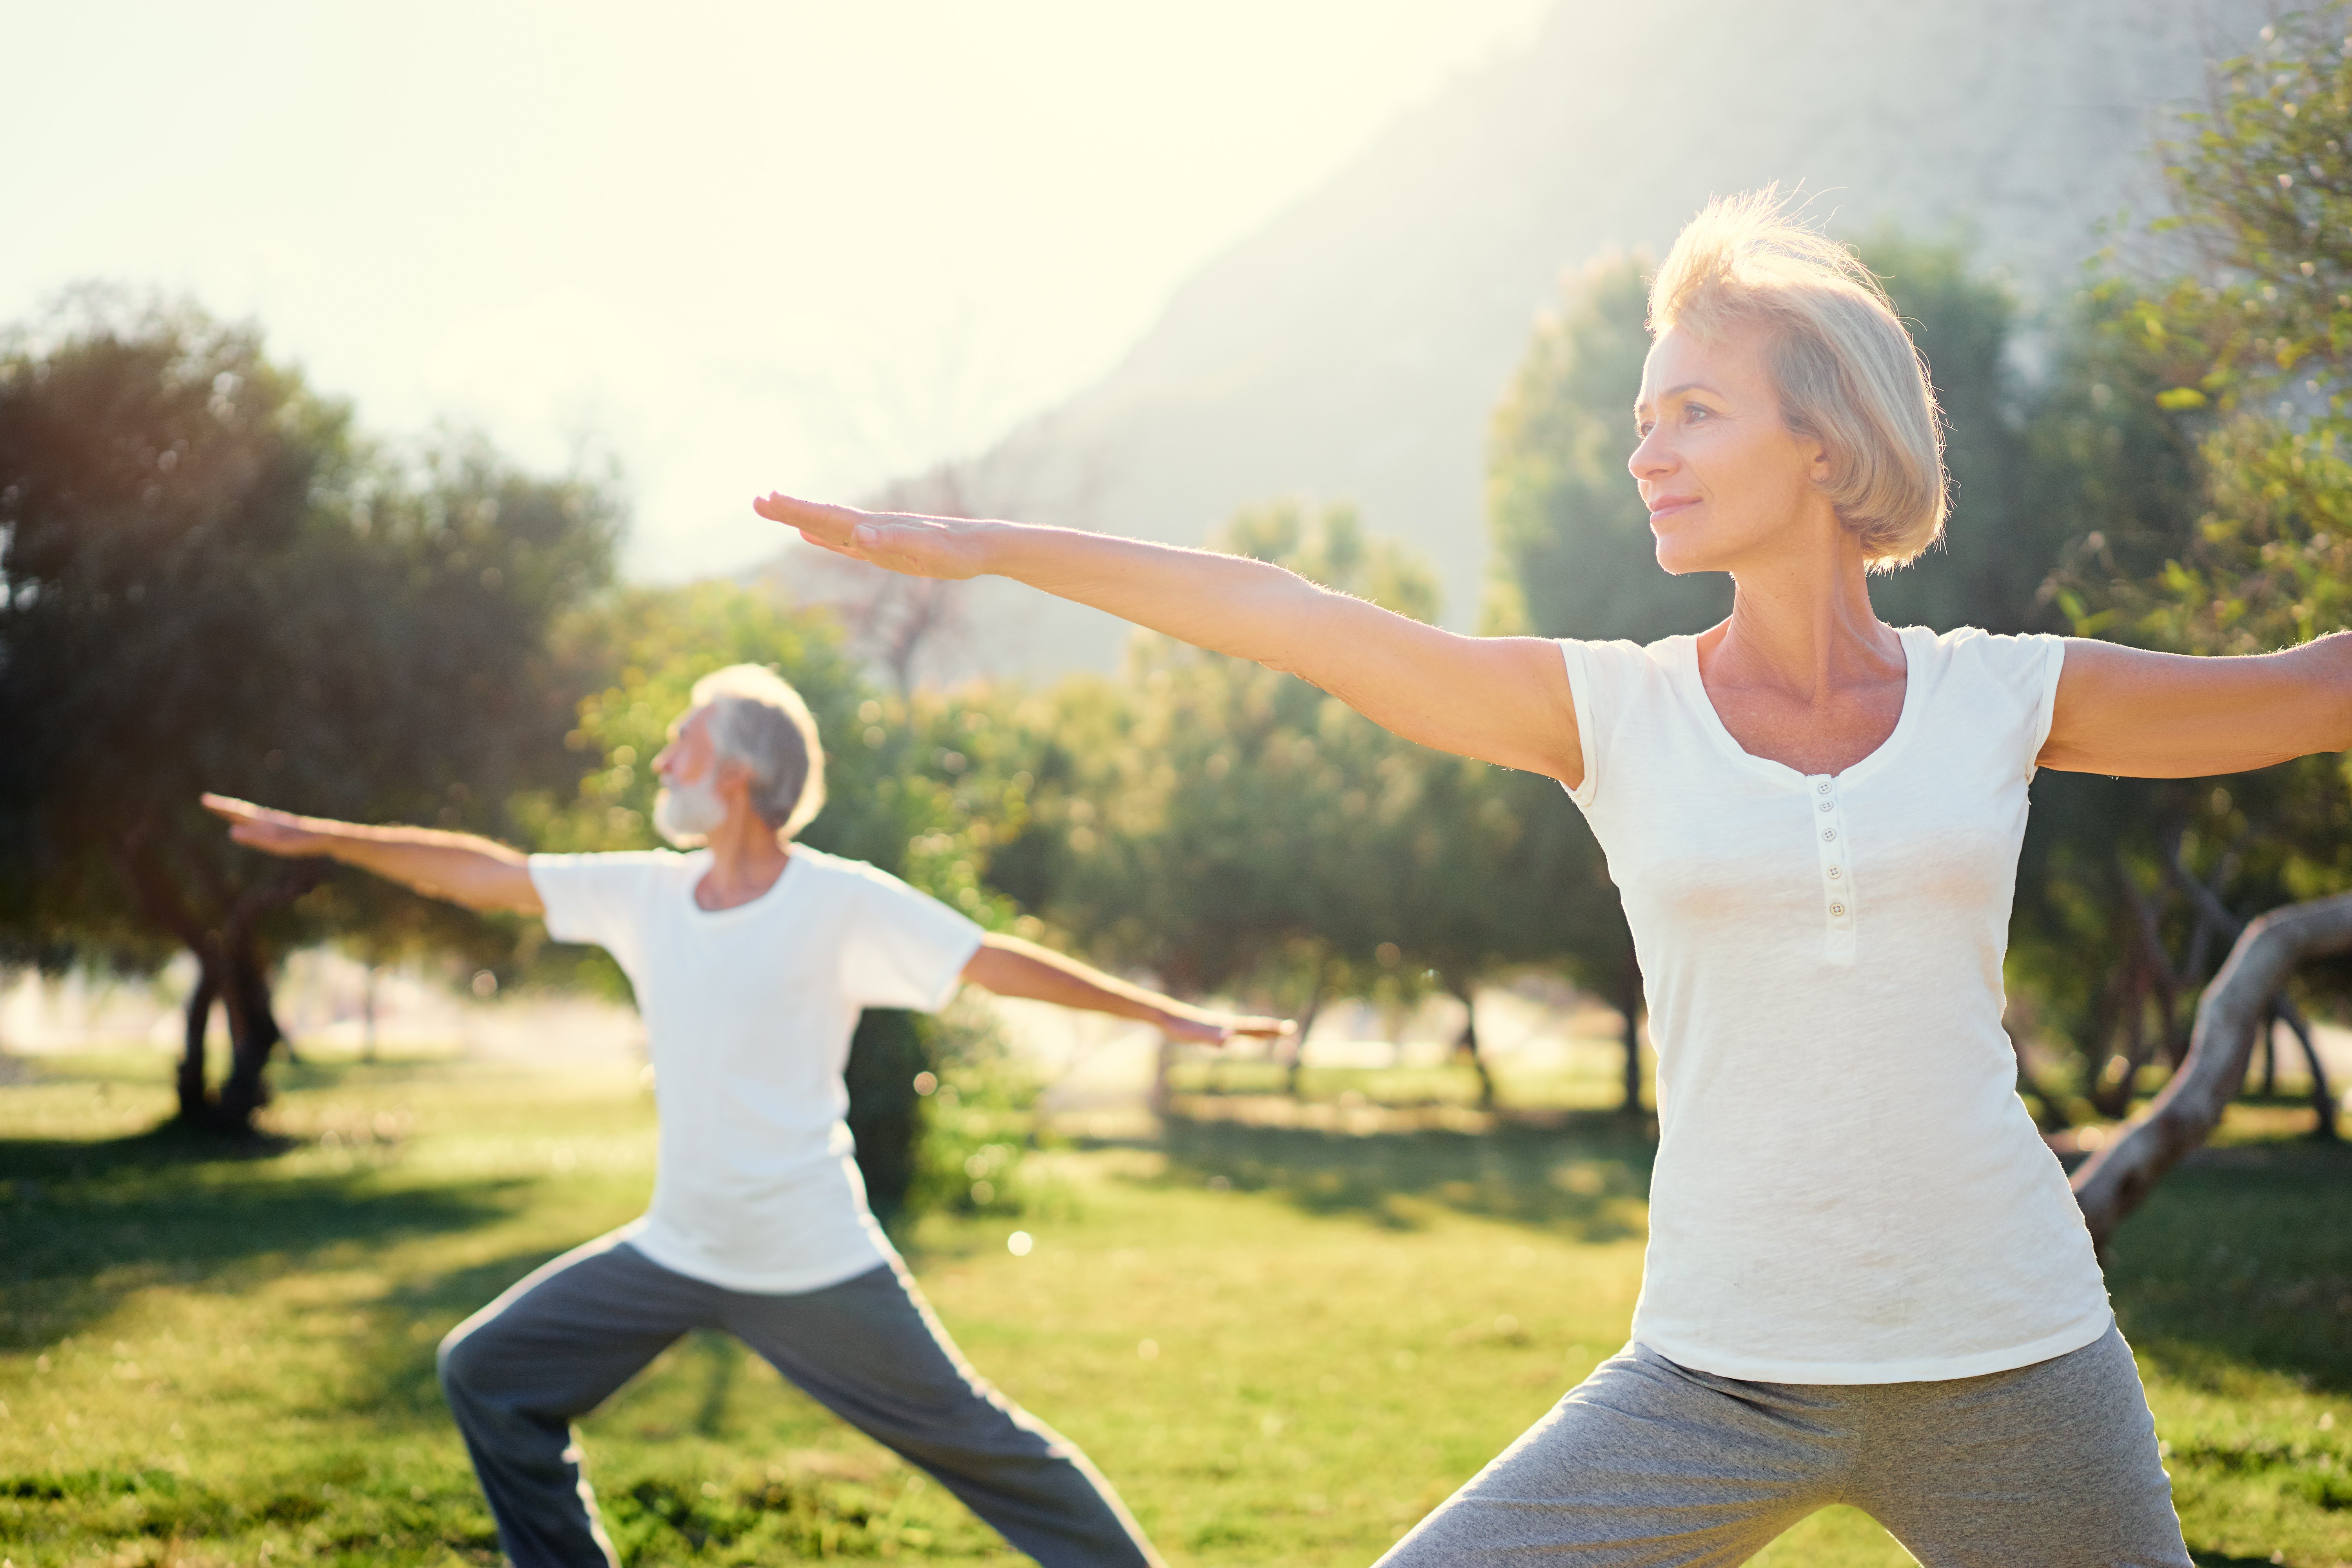 How neuropathy affects the menopause experience